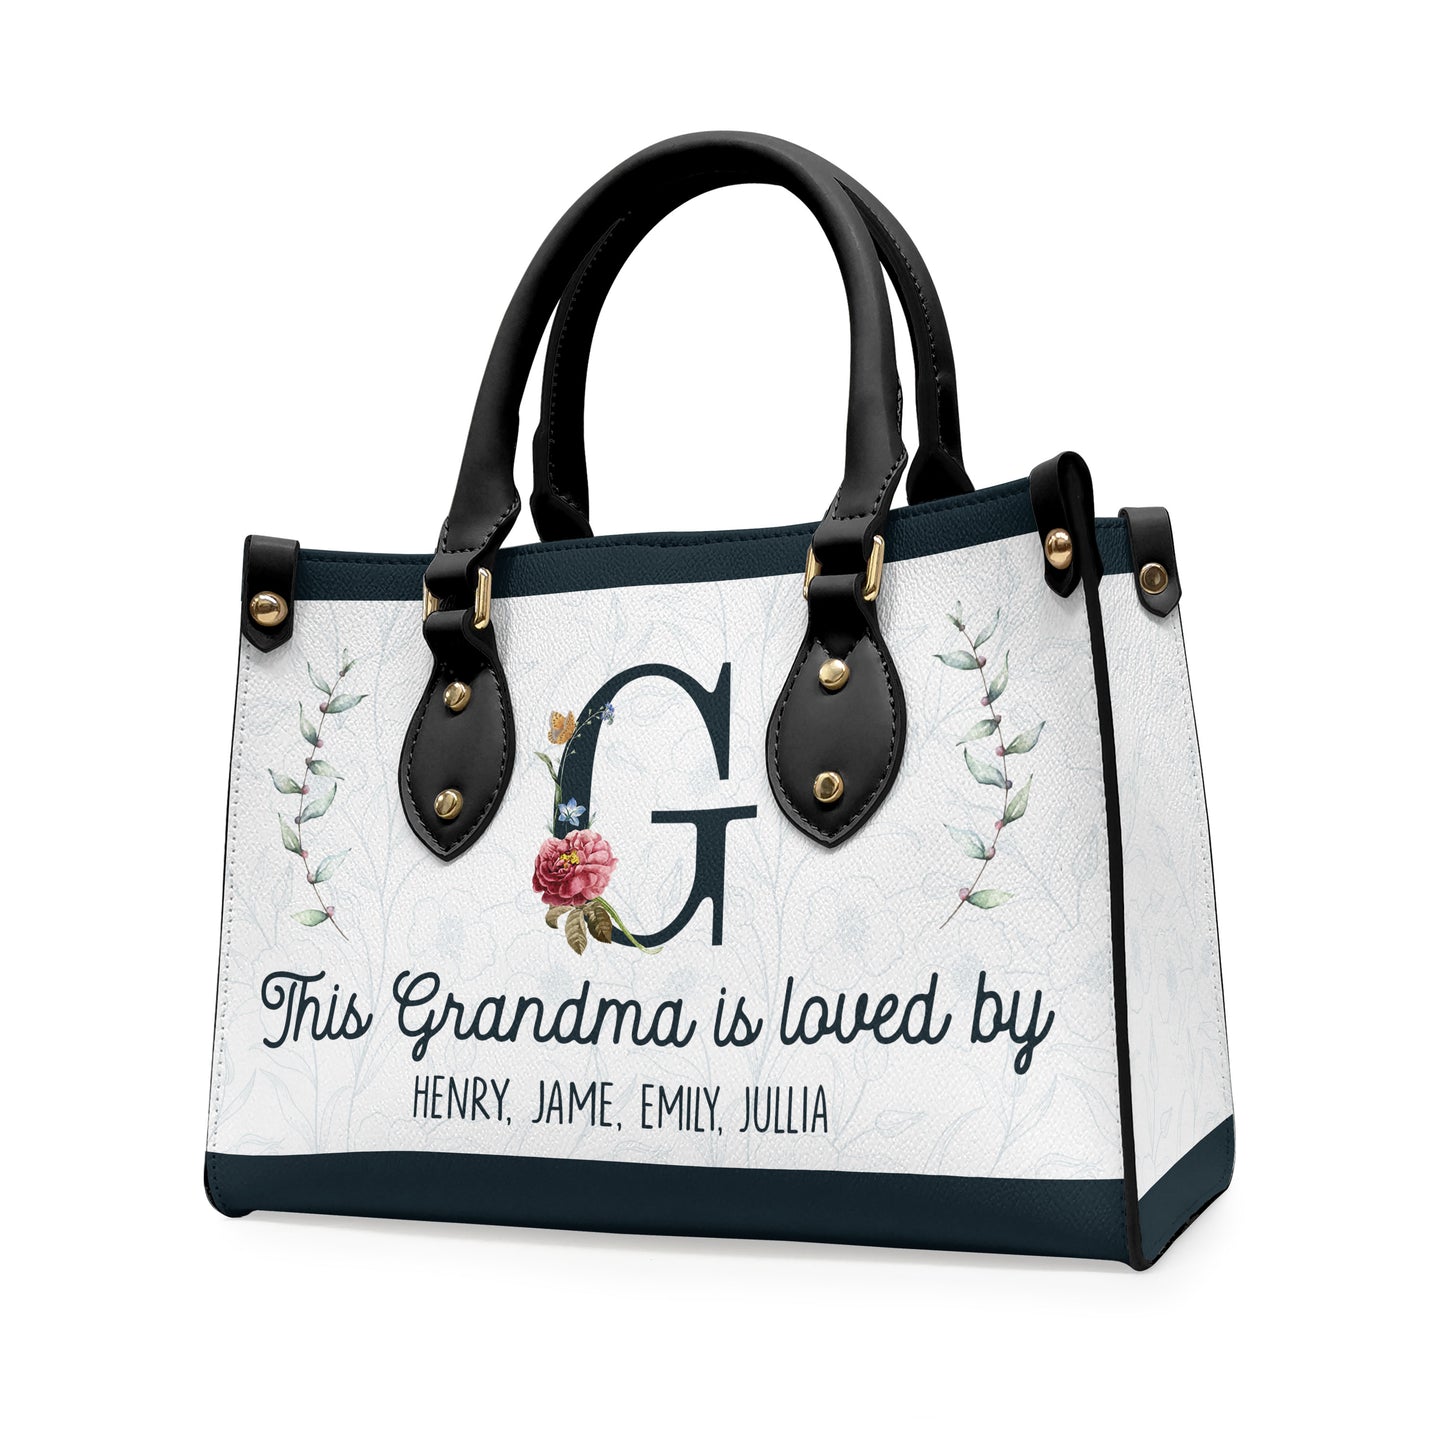 This Grandma Is Loved By - Personalized Leather Bag